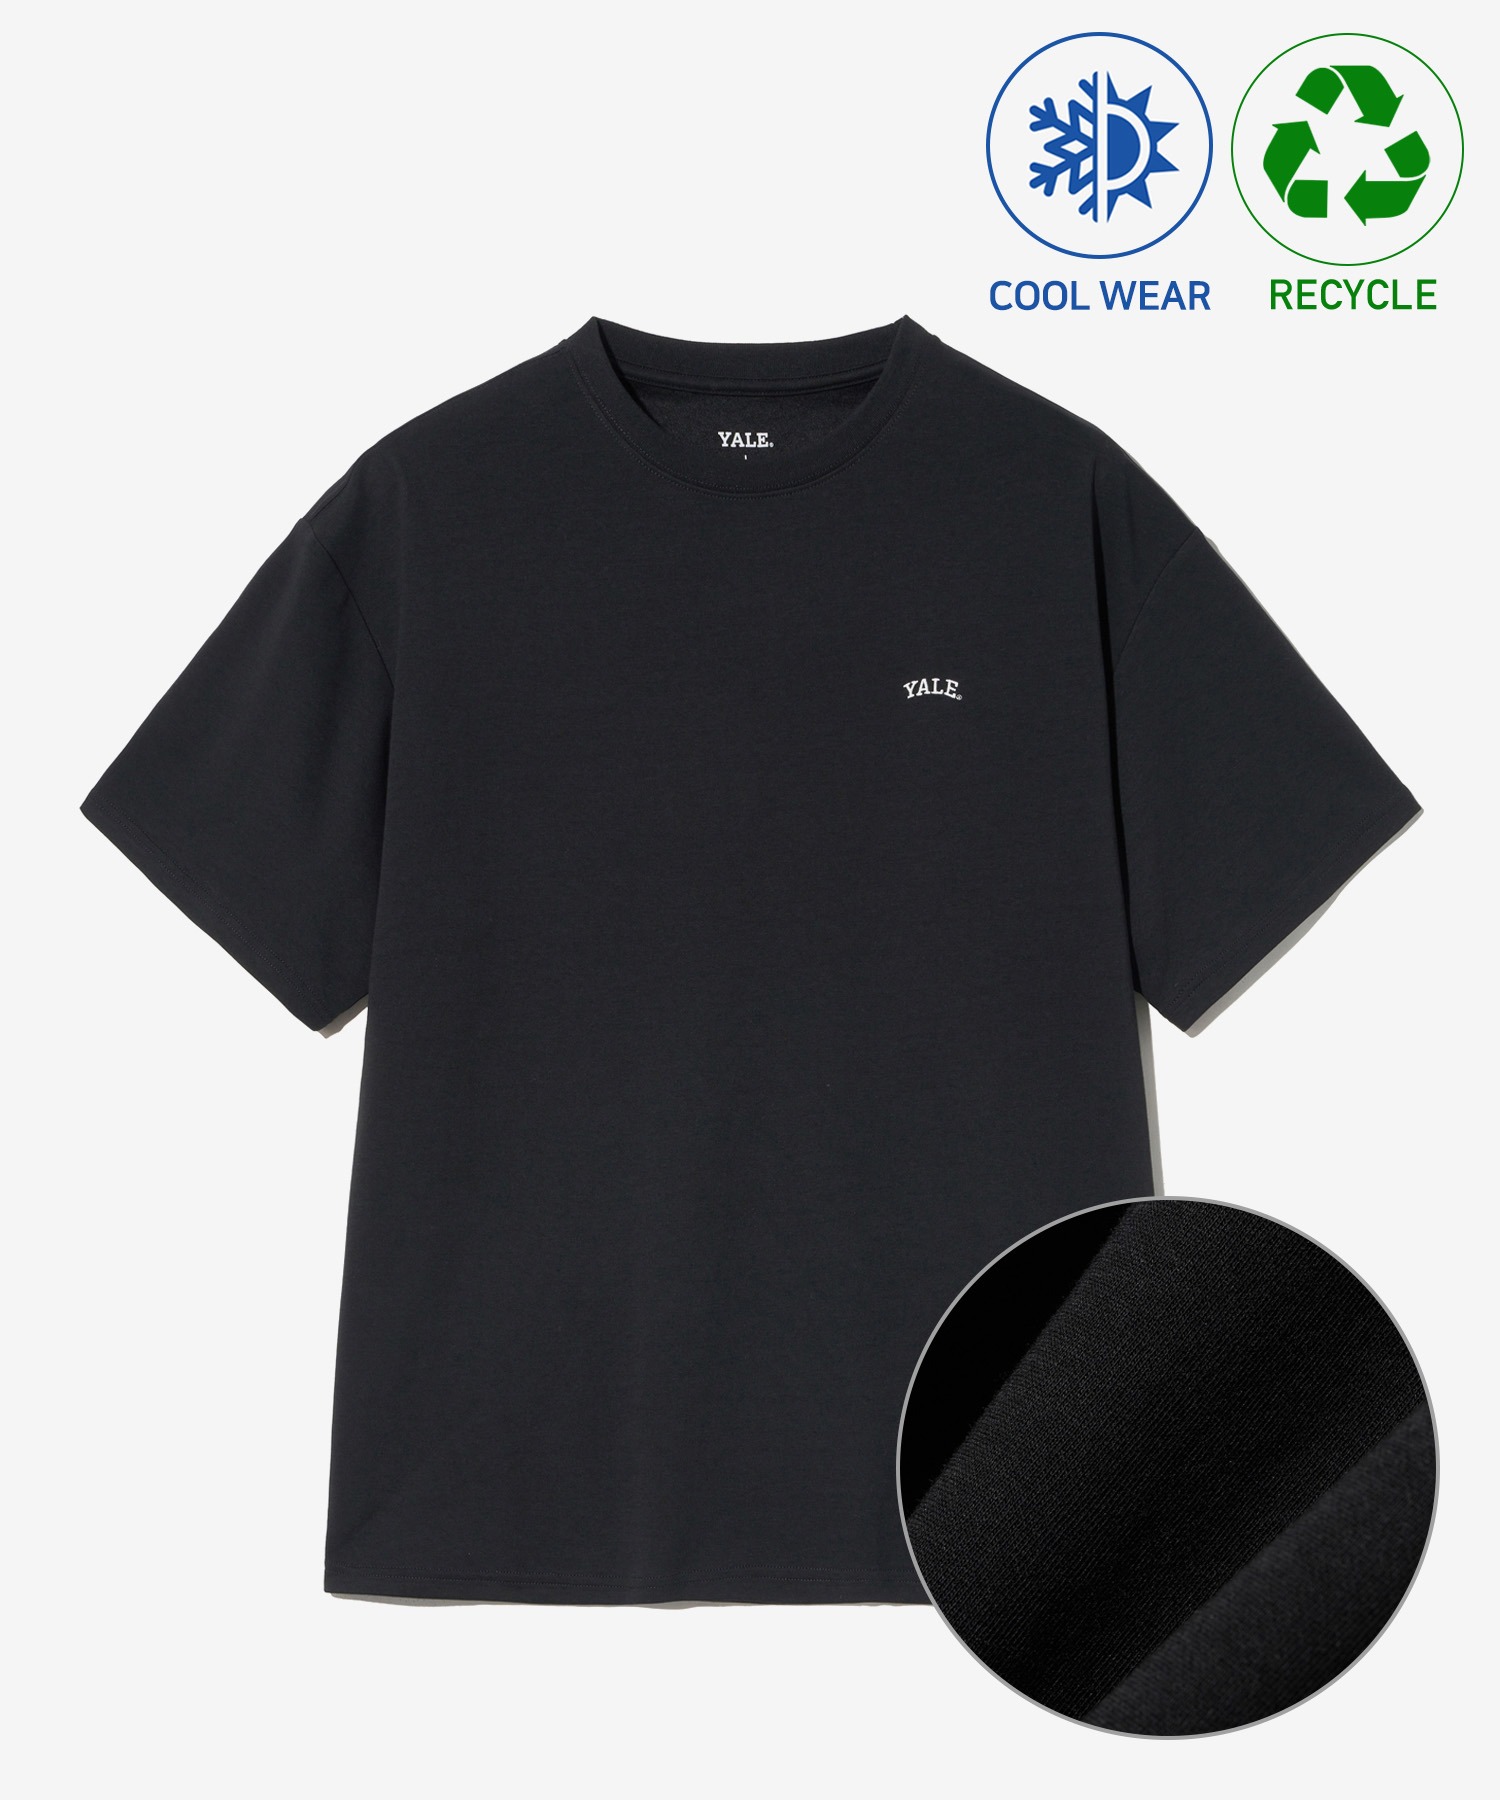 OVERSIZED RECYCLE COOL COTTON T-SHIRT BLACK